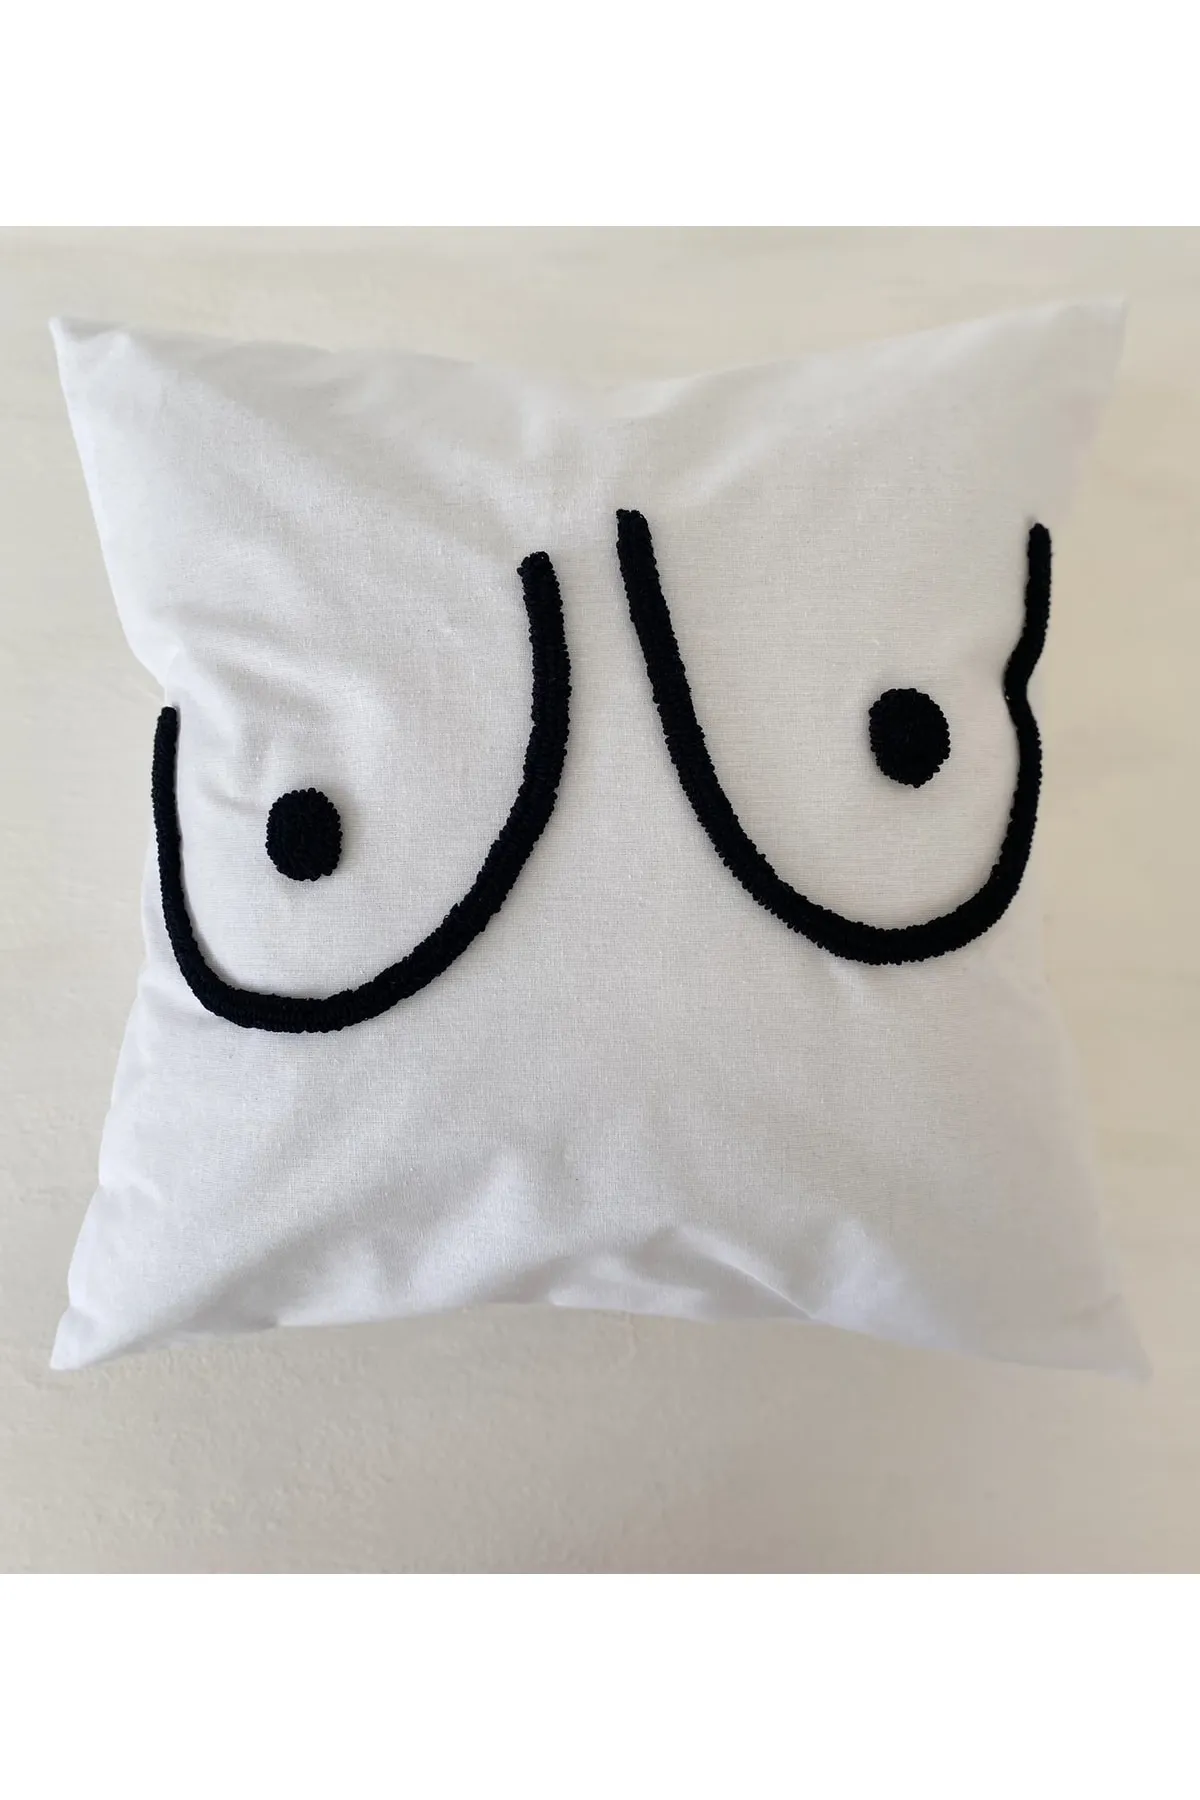 Boobs Punch Throw Pillow Cover